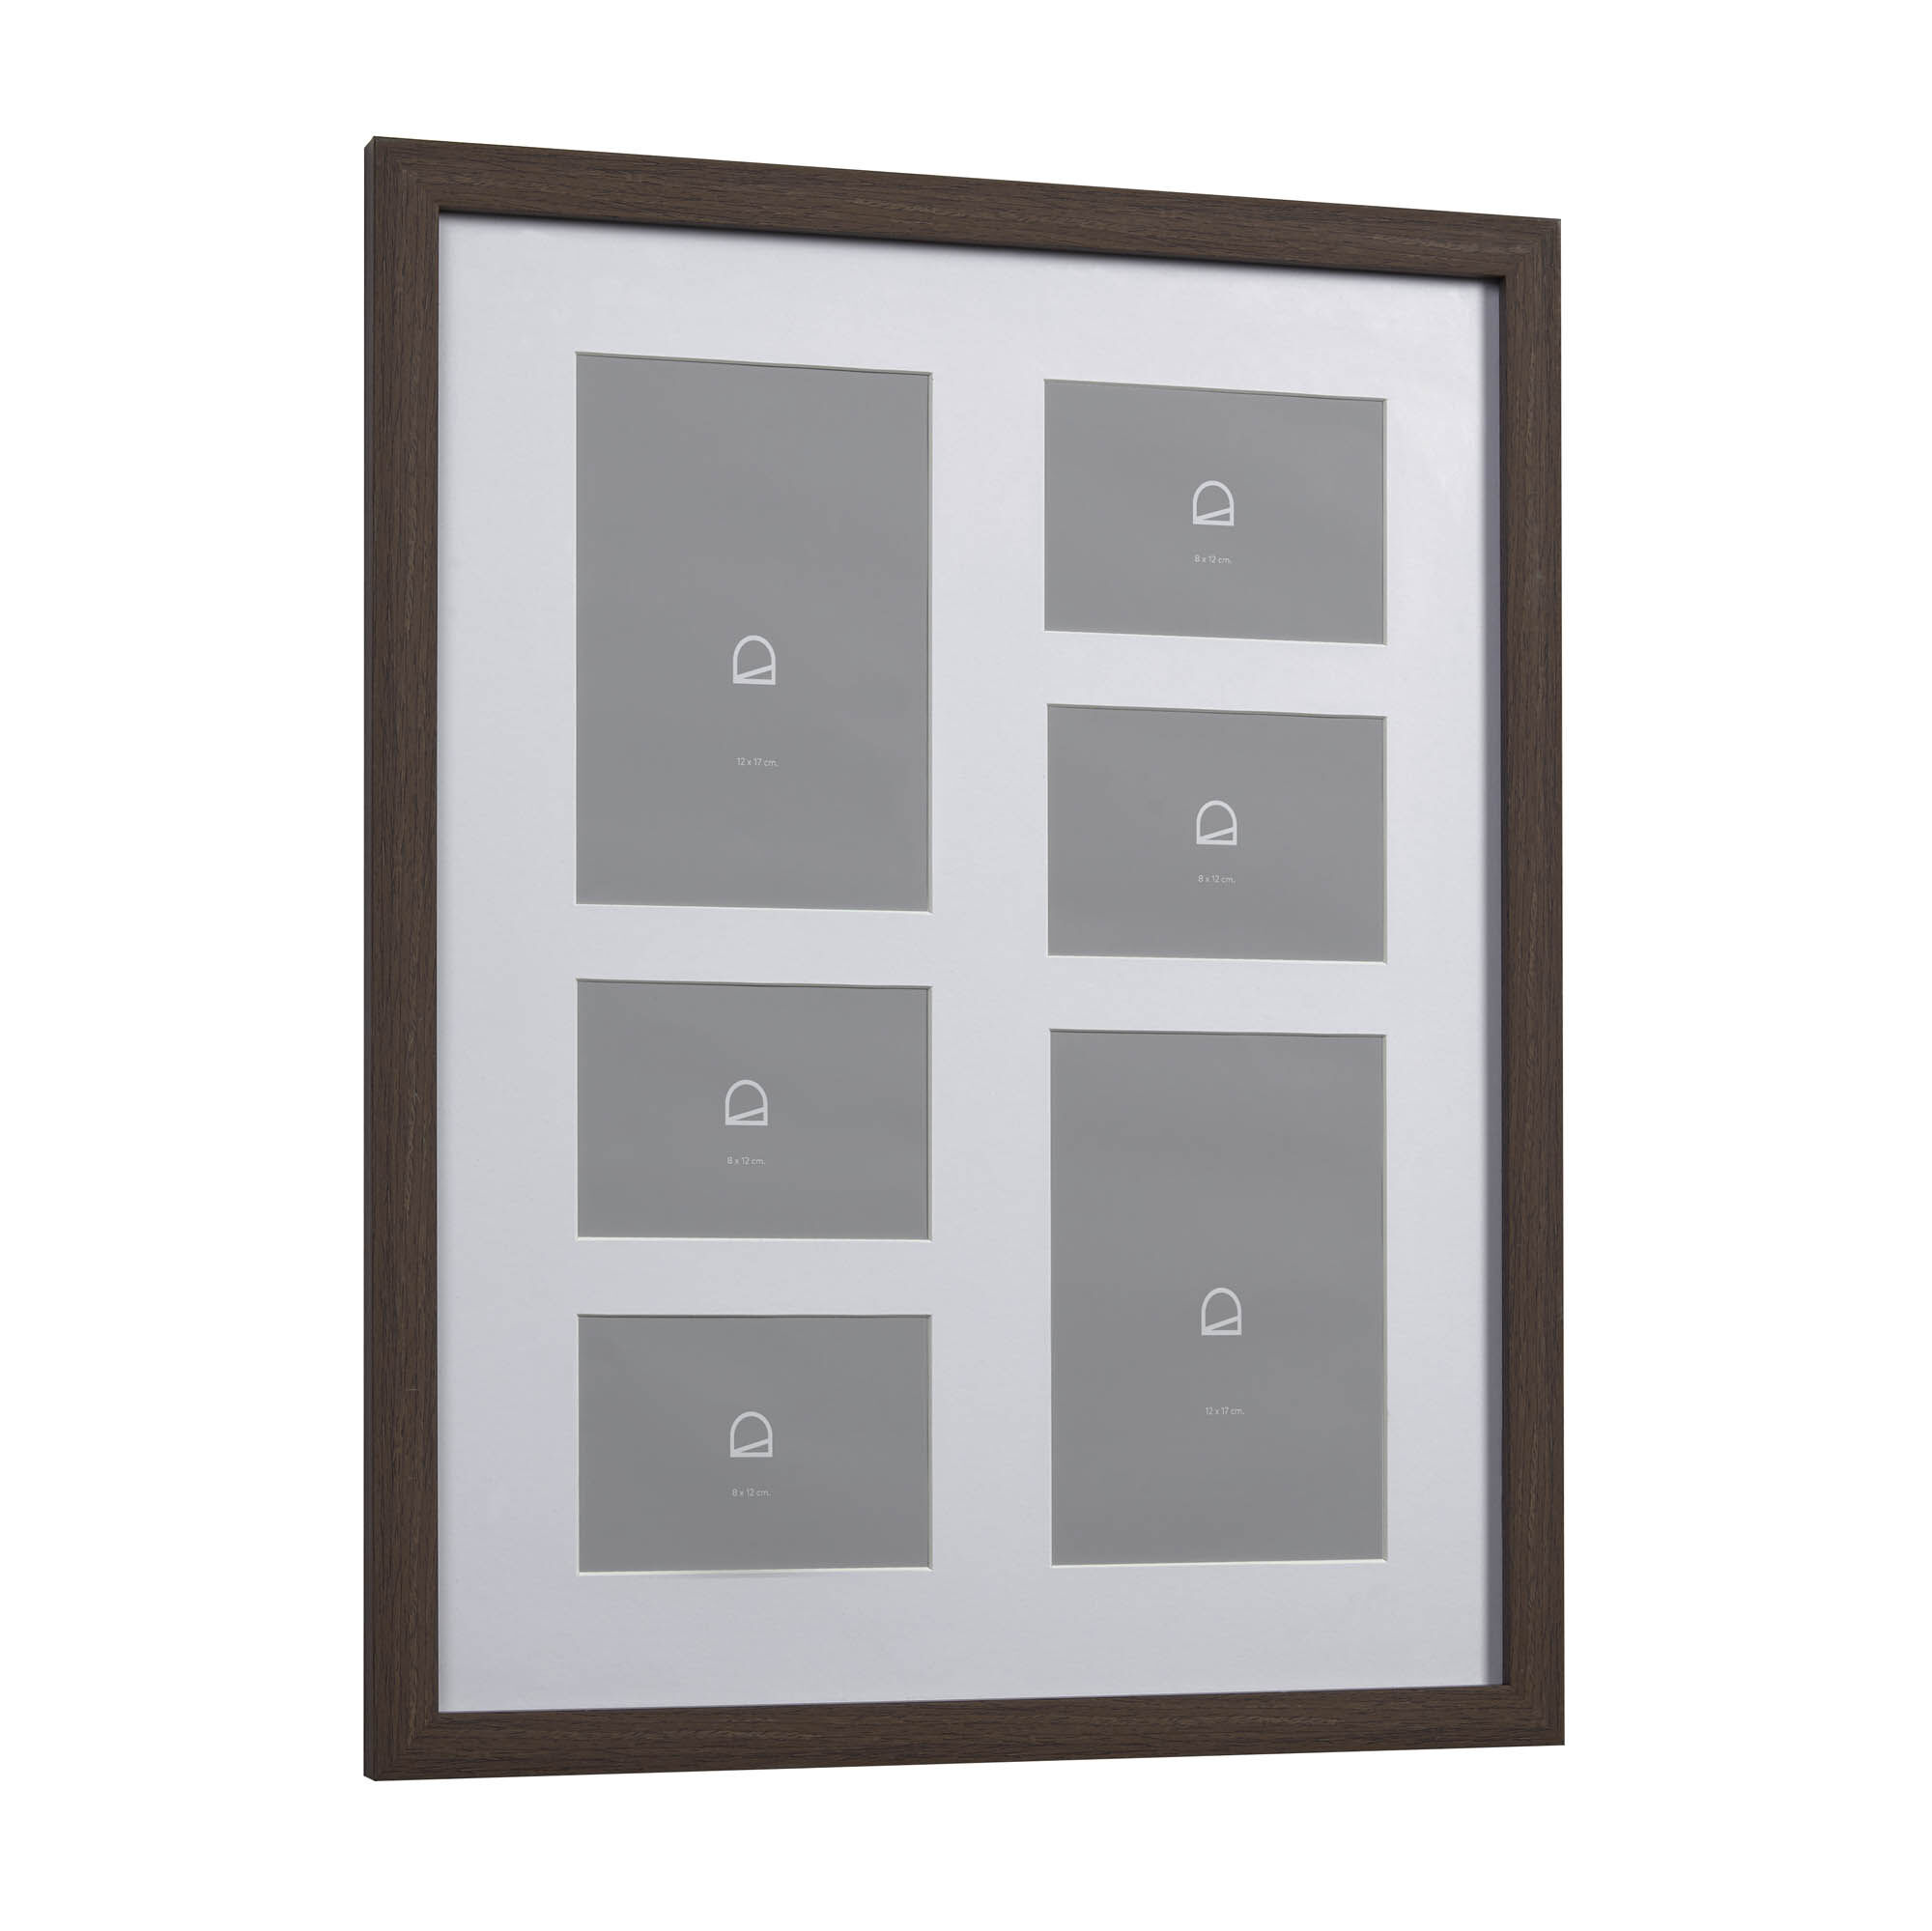 Kave Home Luah dark picture frame 39 x 49 cm